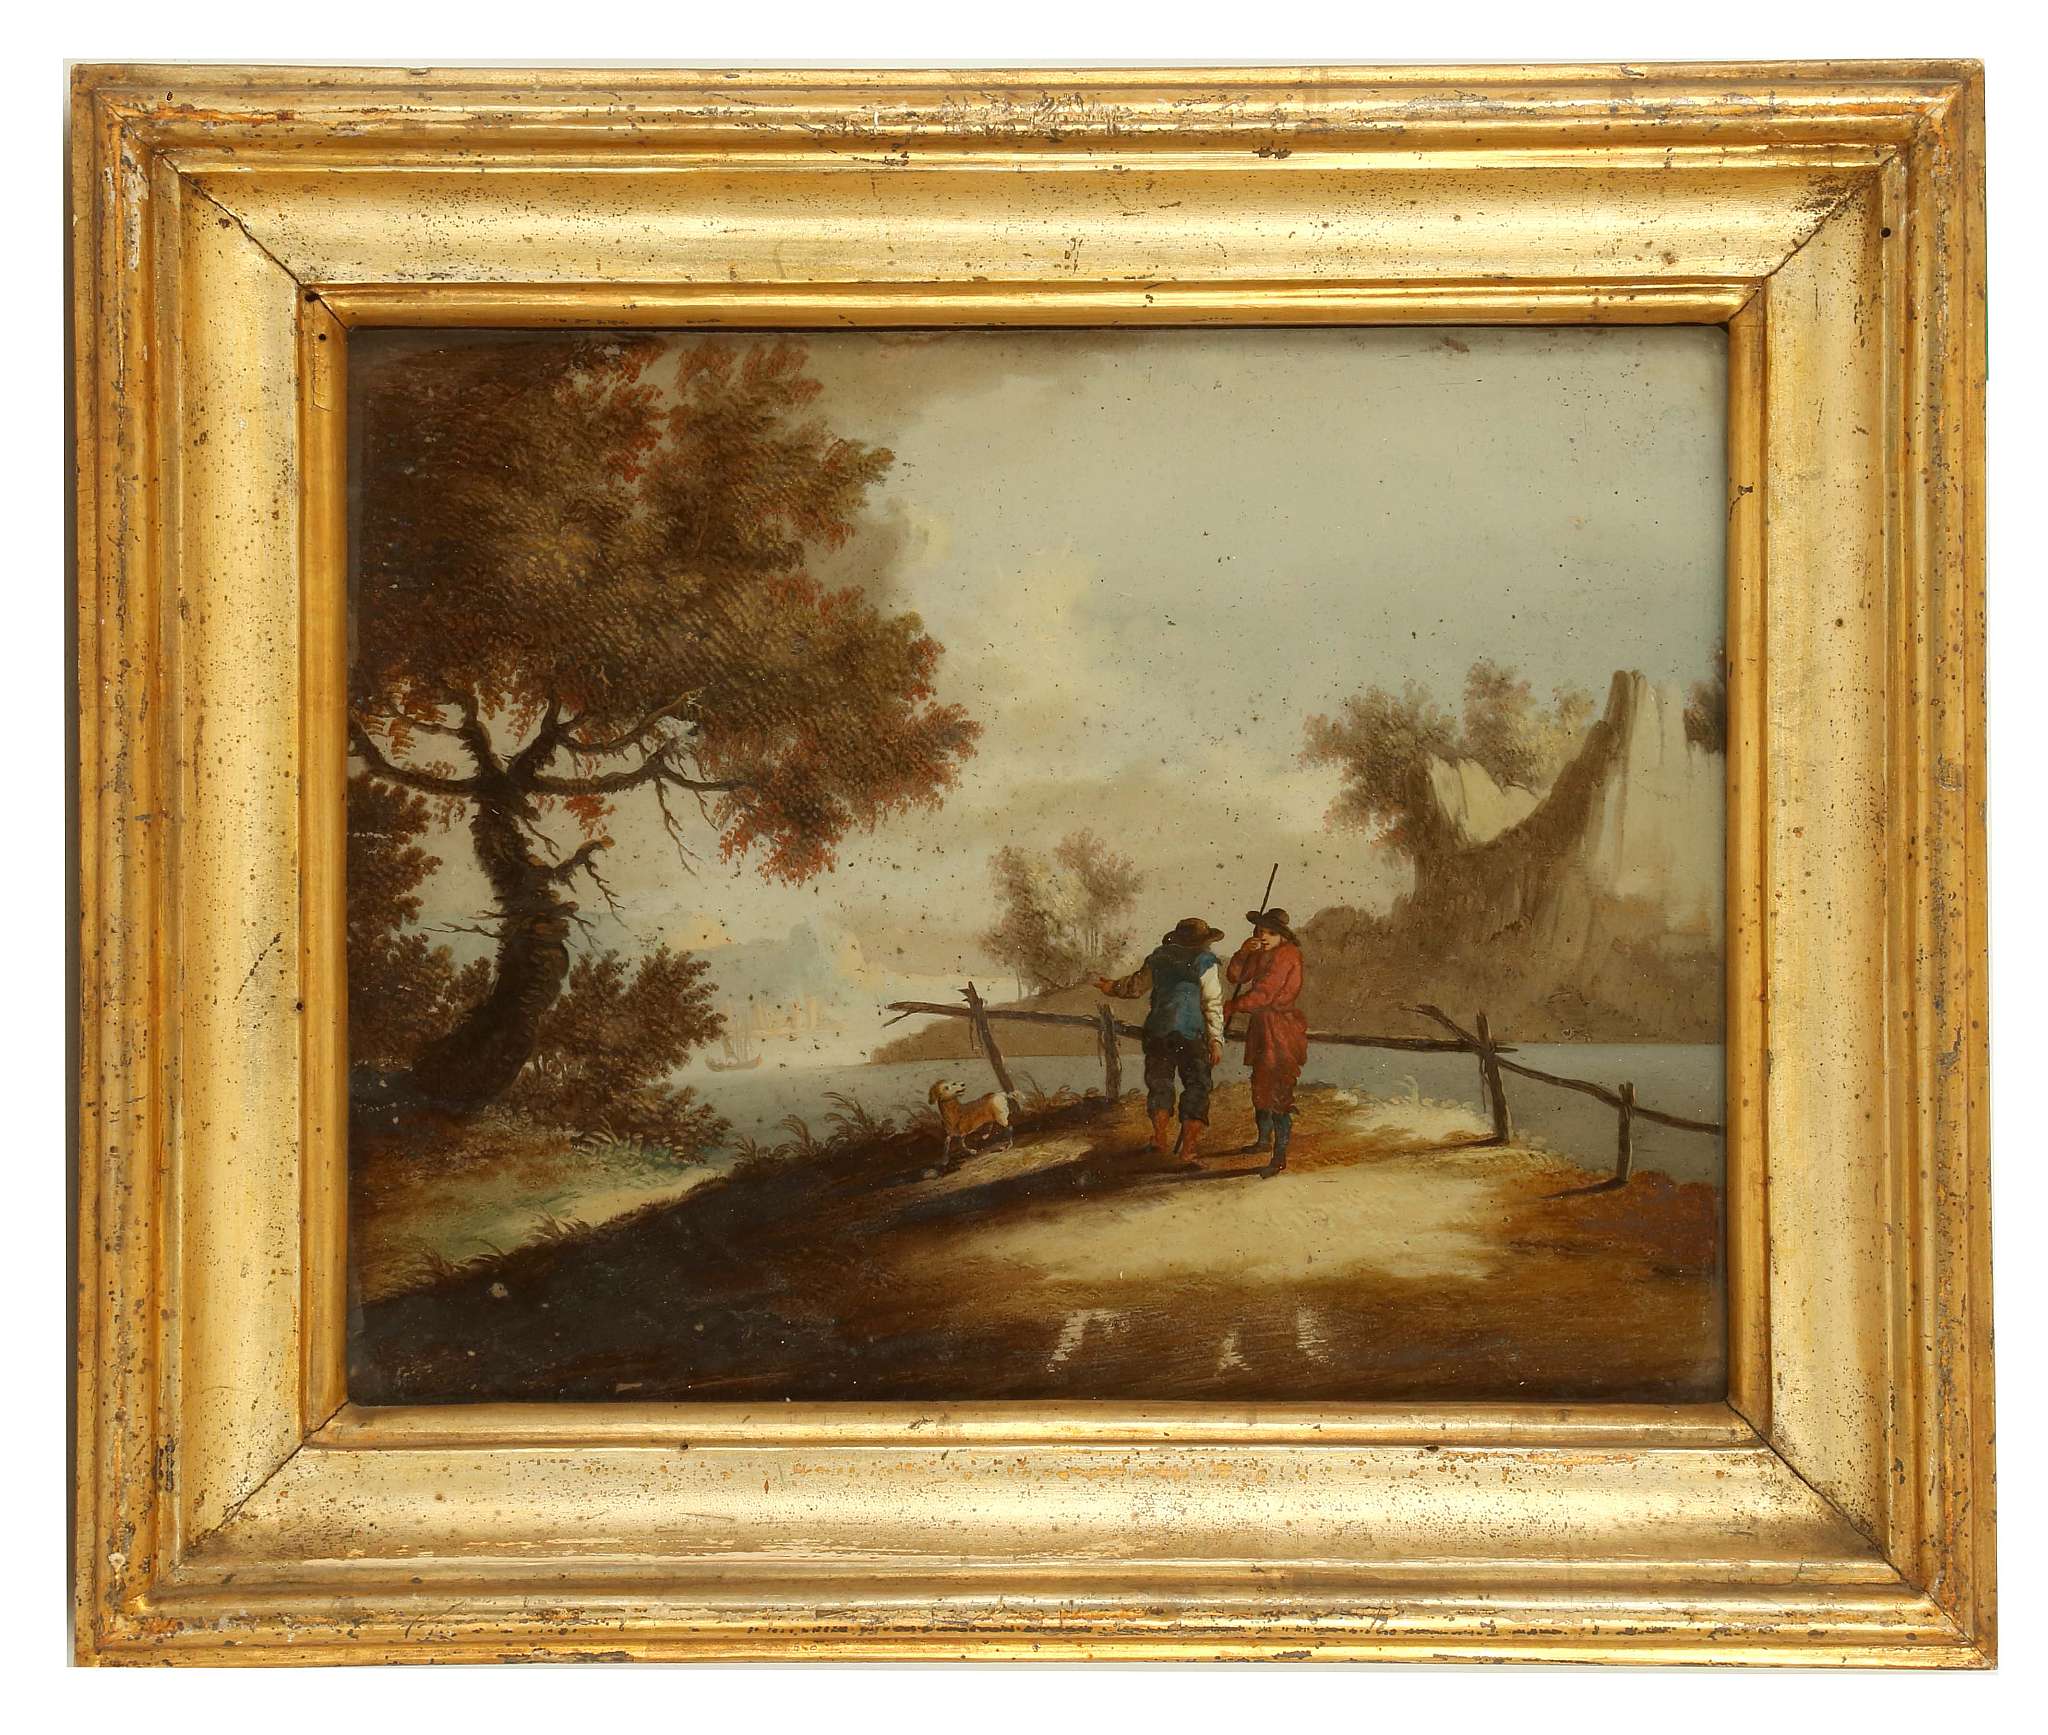 CIRCA LATE 18TH CENTURY, POSSIBLY ITALIAN. A set of four reverse glass painted landscape views. In